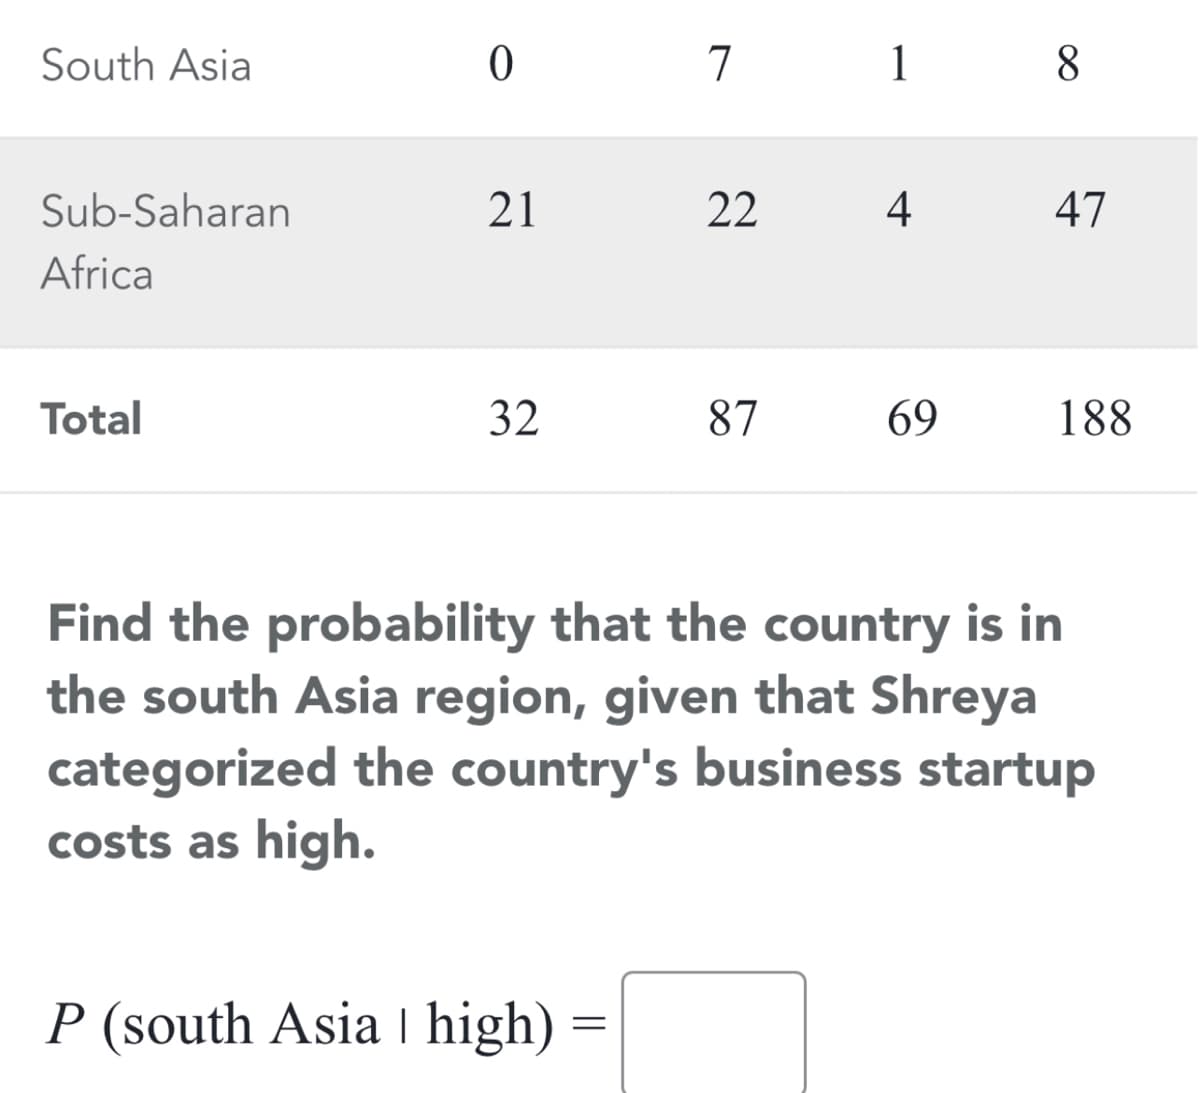 South Asia
7
1
8
Sub-Saharan
21
22
4
47
Africa
Total
32
87
69
188
Find the probability that the country is in
the south Asia region, given that Shreya
categorized the country's business startup
costs as high.
P (south Asia I high)
